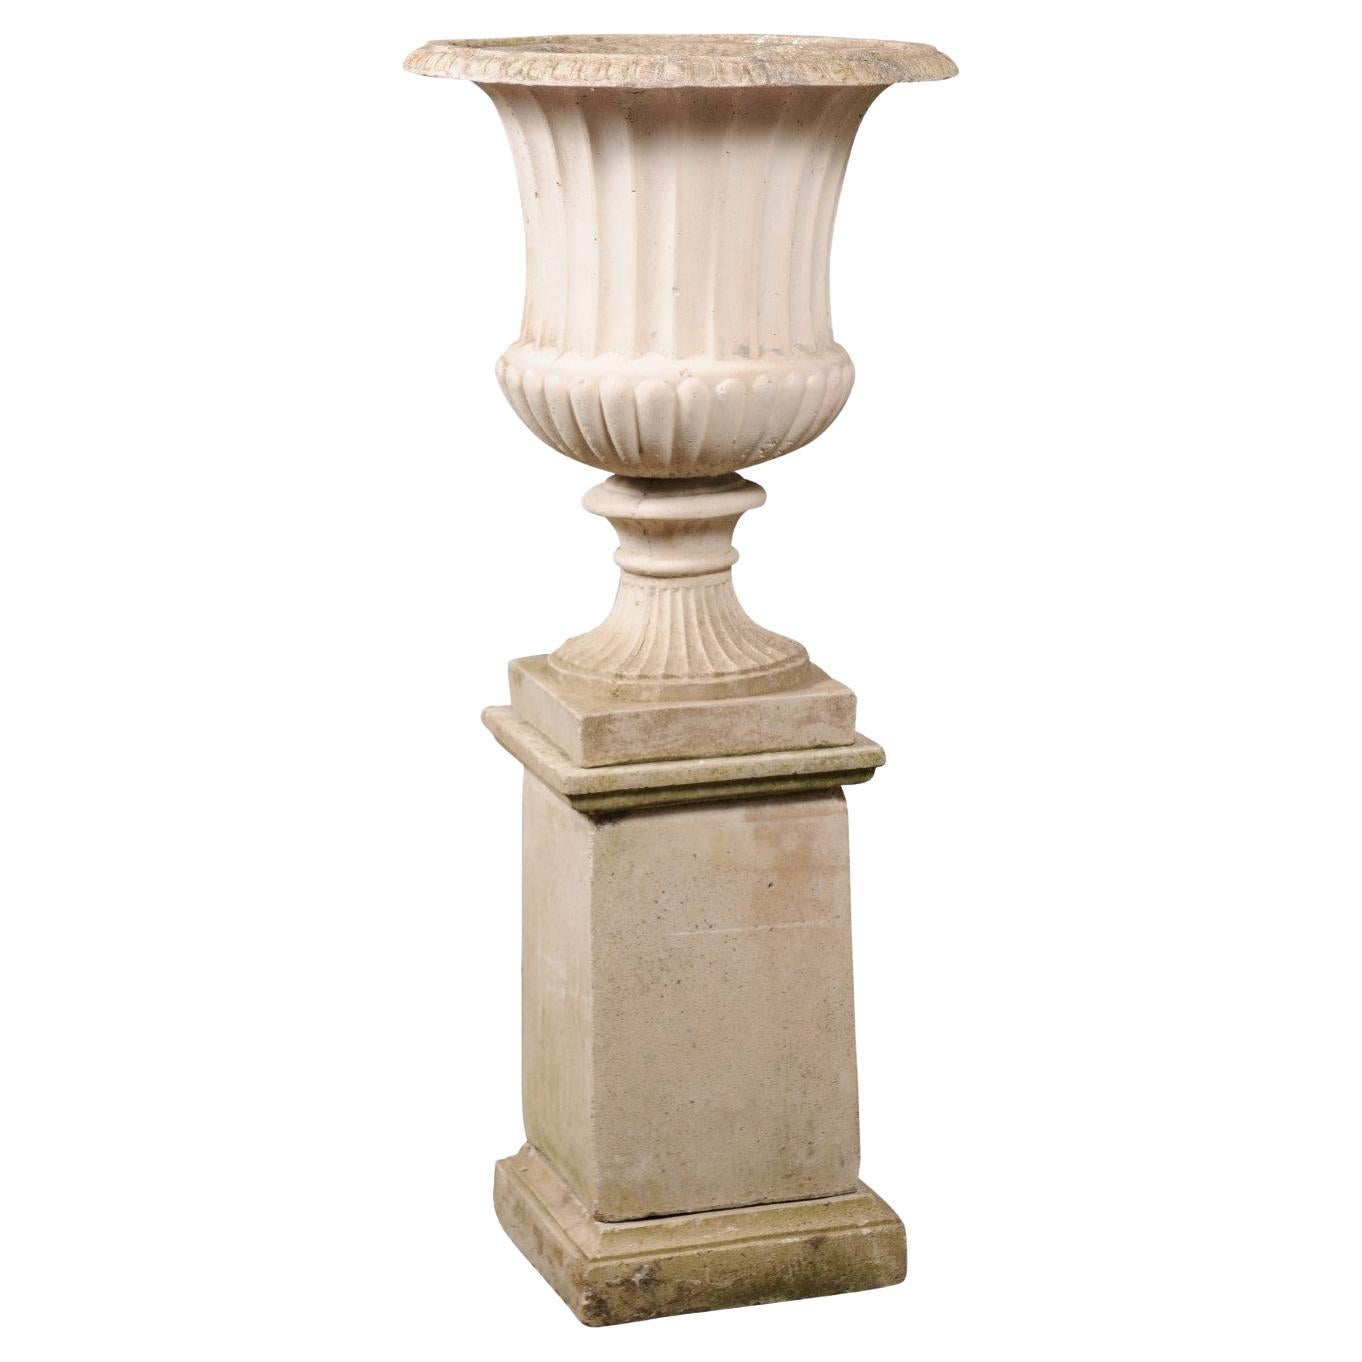 Turn of the Century Italian Campania Urn with Gadroon Motifs on Tall Pedestal